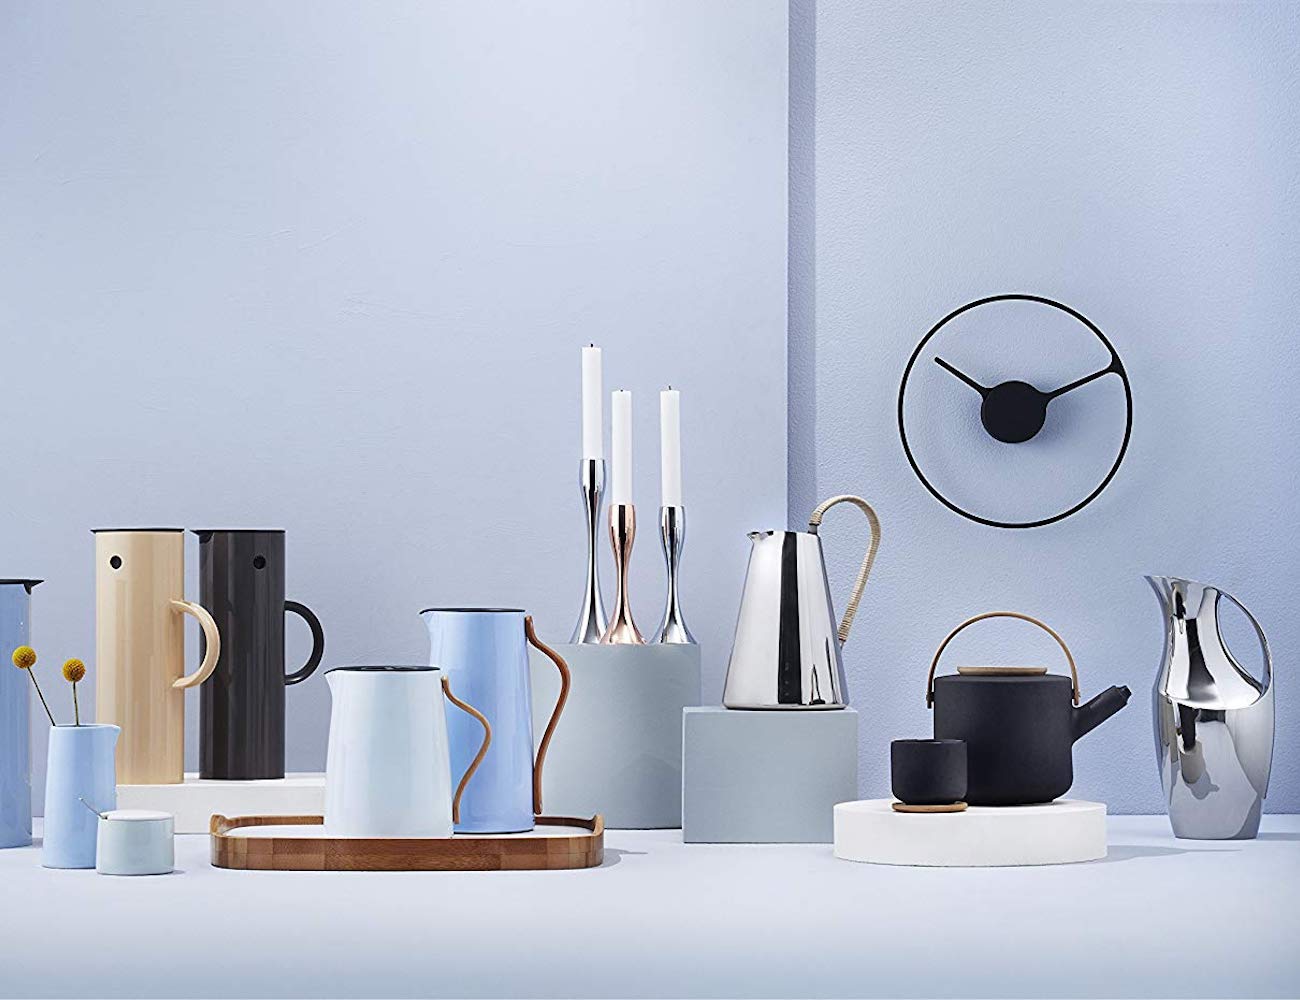 Stelton Time Floating Wall Clock